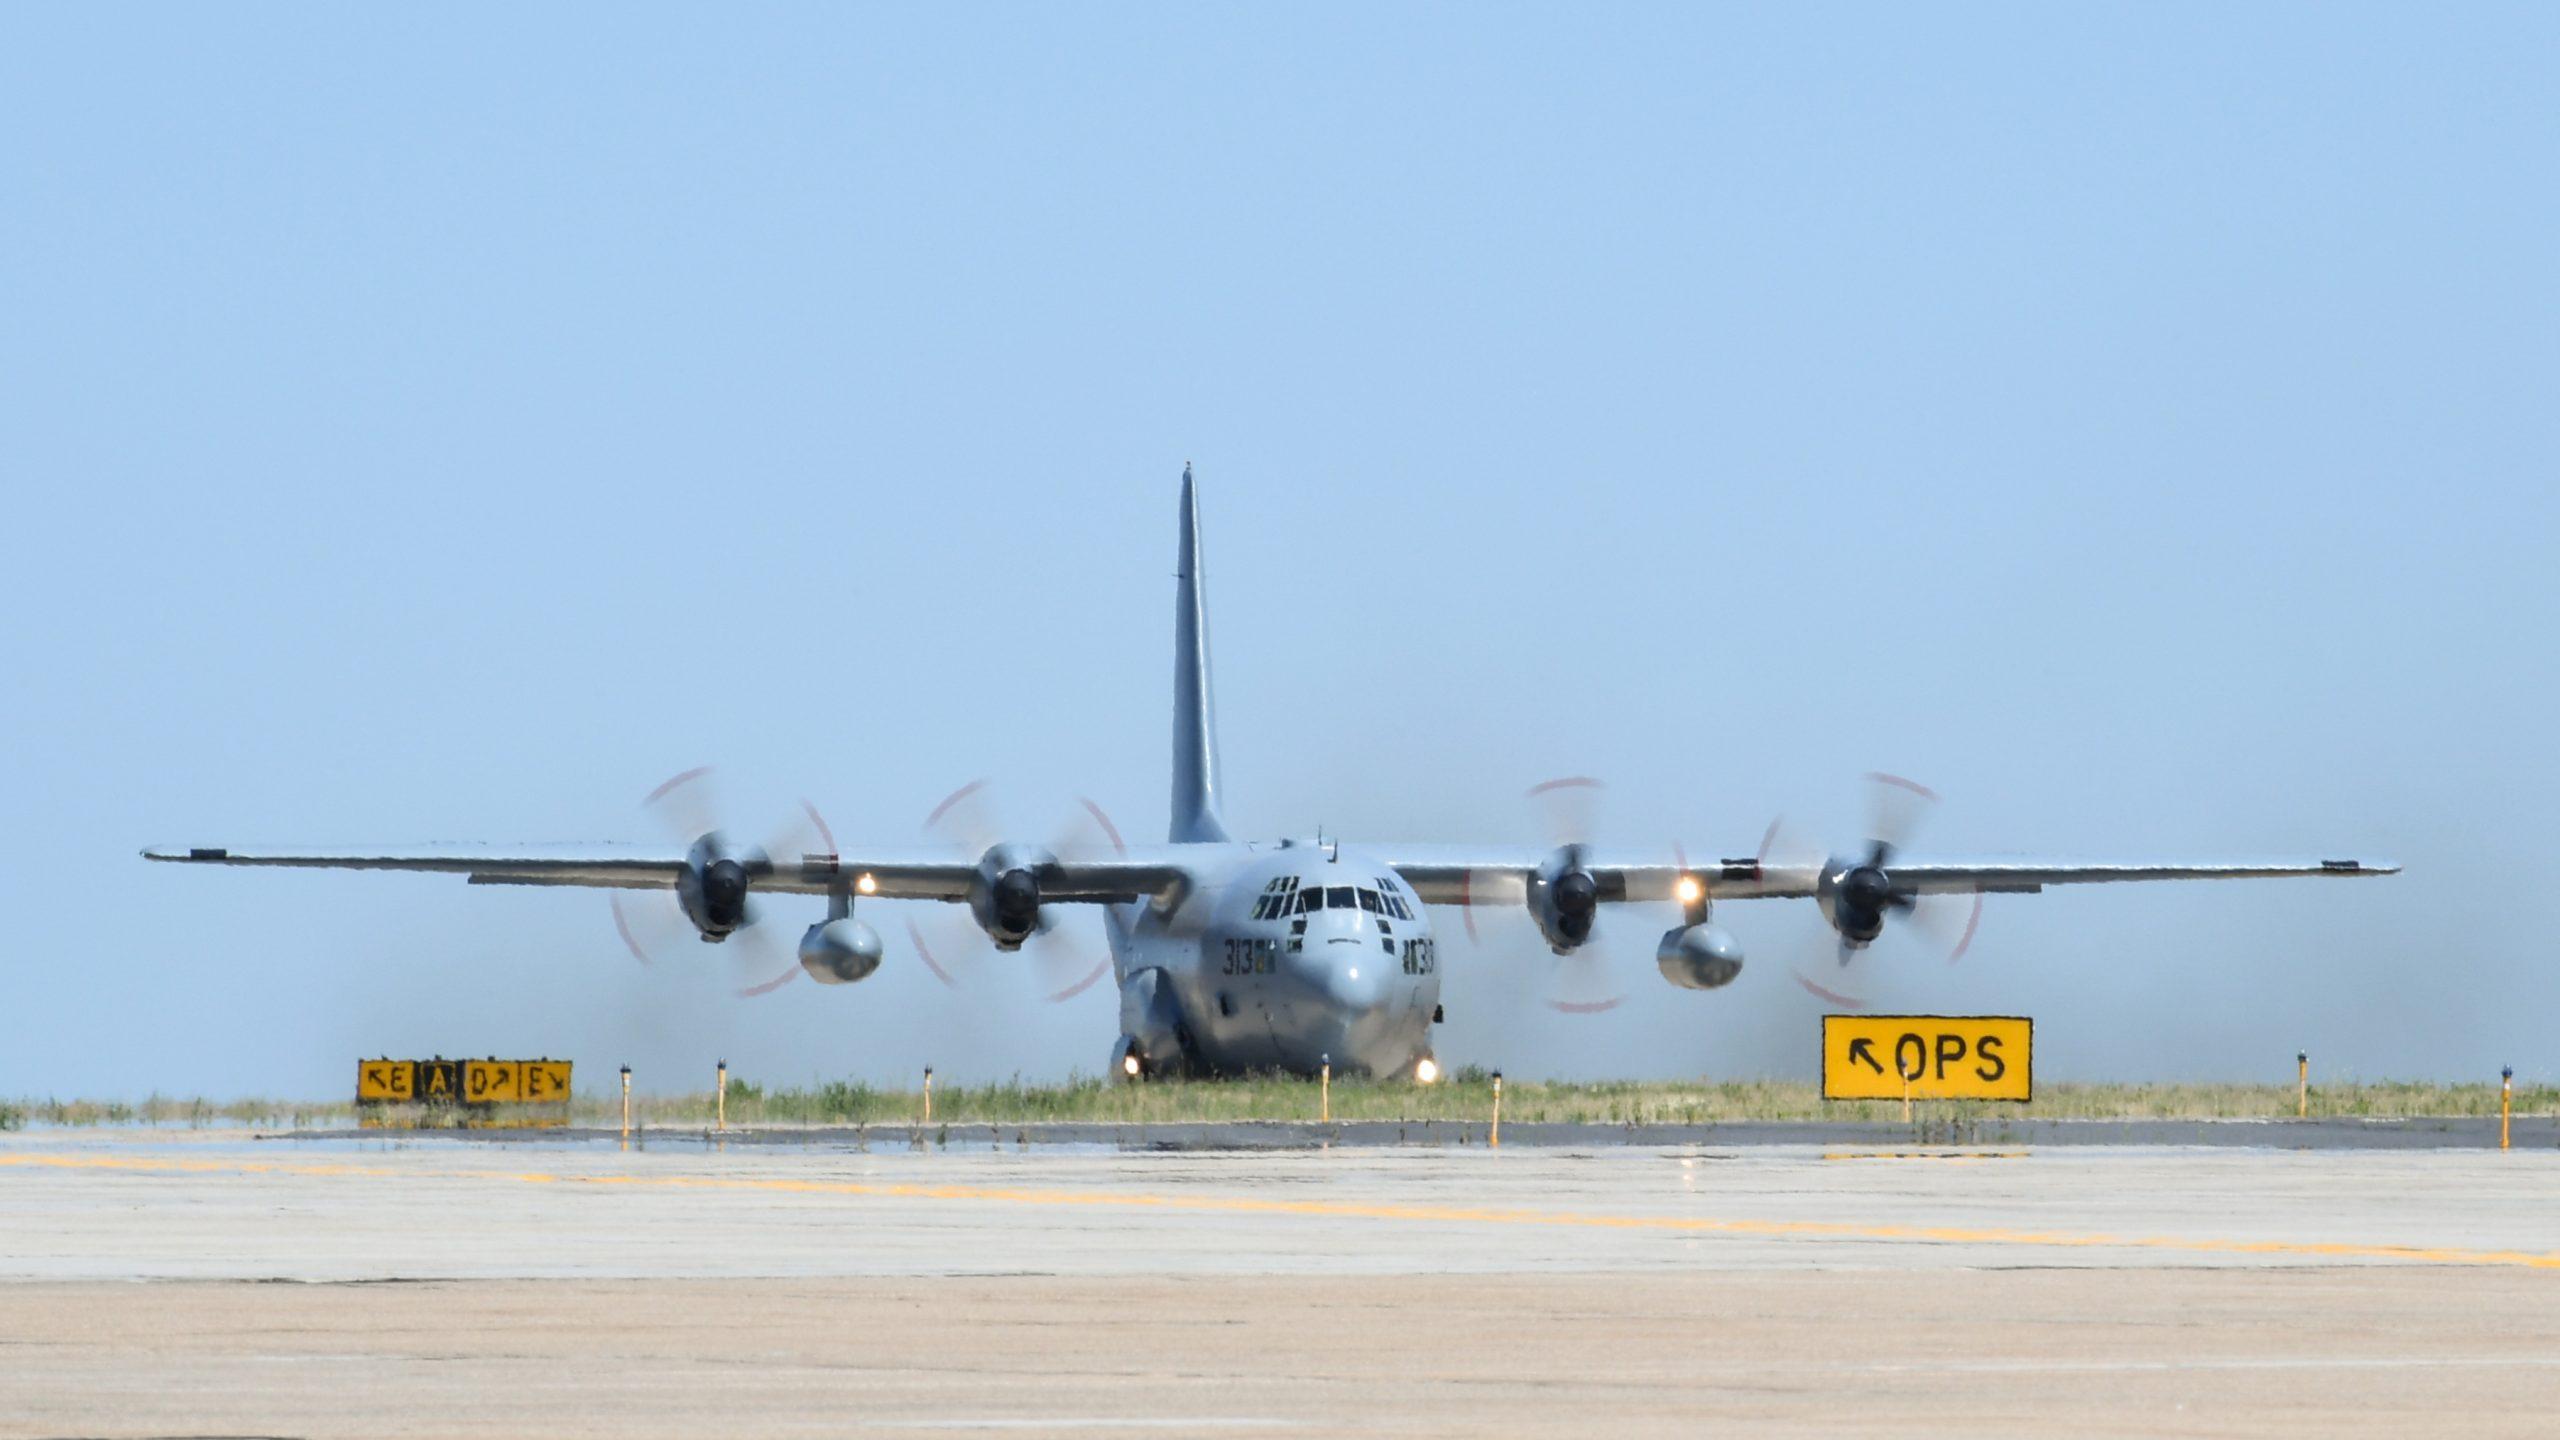 The sustainment on USAF C-130H and J-model aircraft will be performed by L3Harris at its 1.1 million-square-foot aircraft modification center in Waco, Texas.